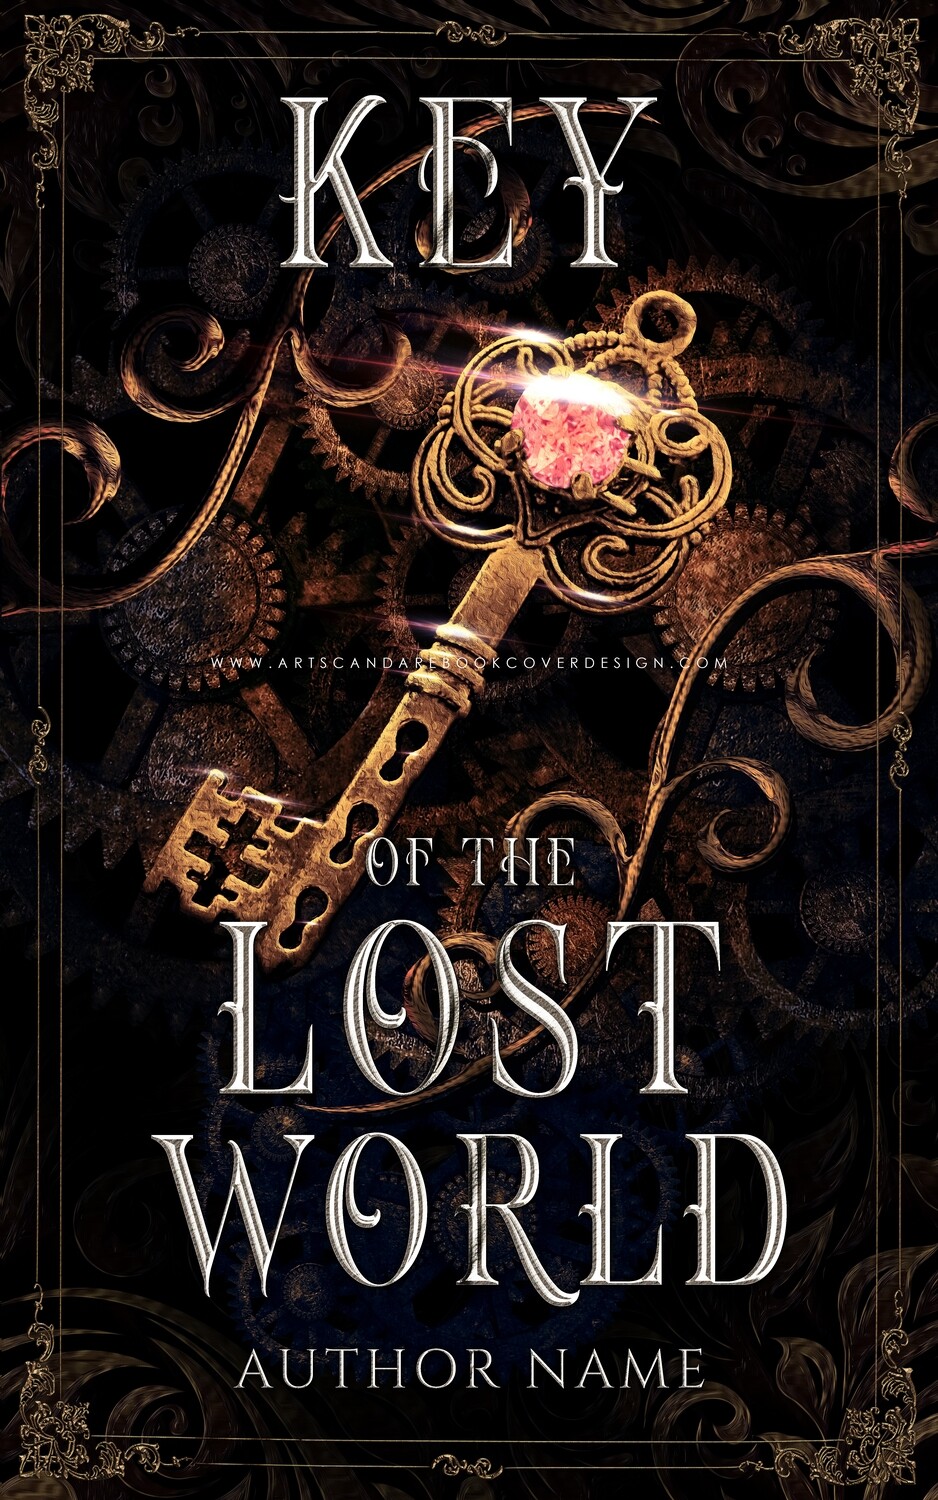 Ebook: Key of the Lost World